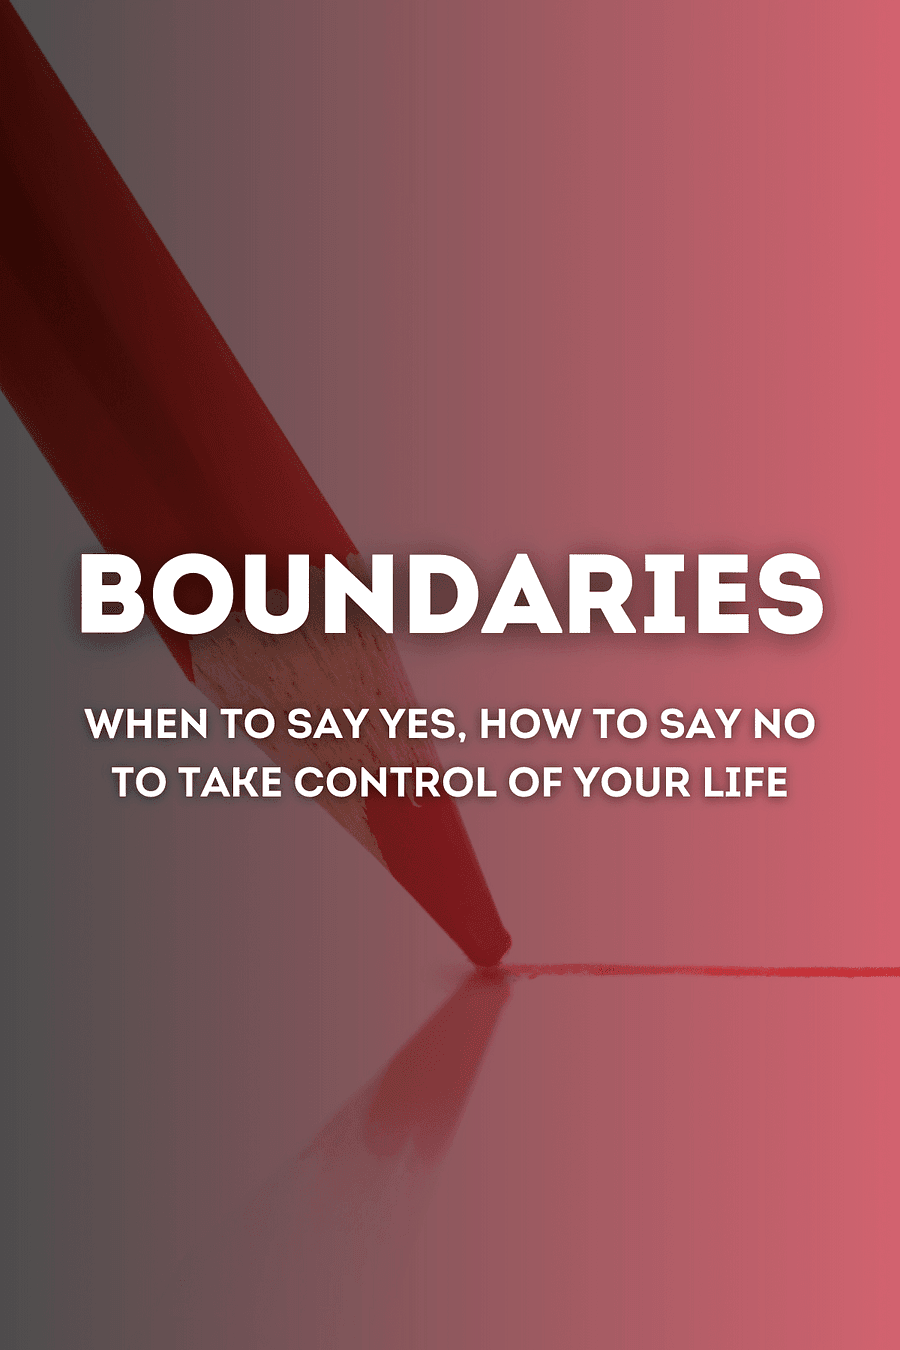 Boundaries Updated and Expanded Edition by Henry Cloud, John Townsend - Book Summary